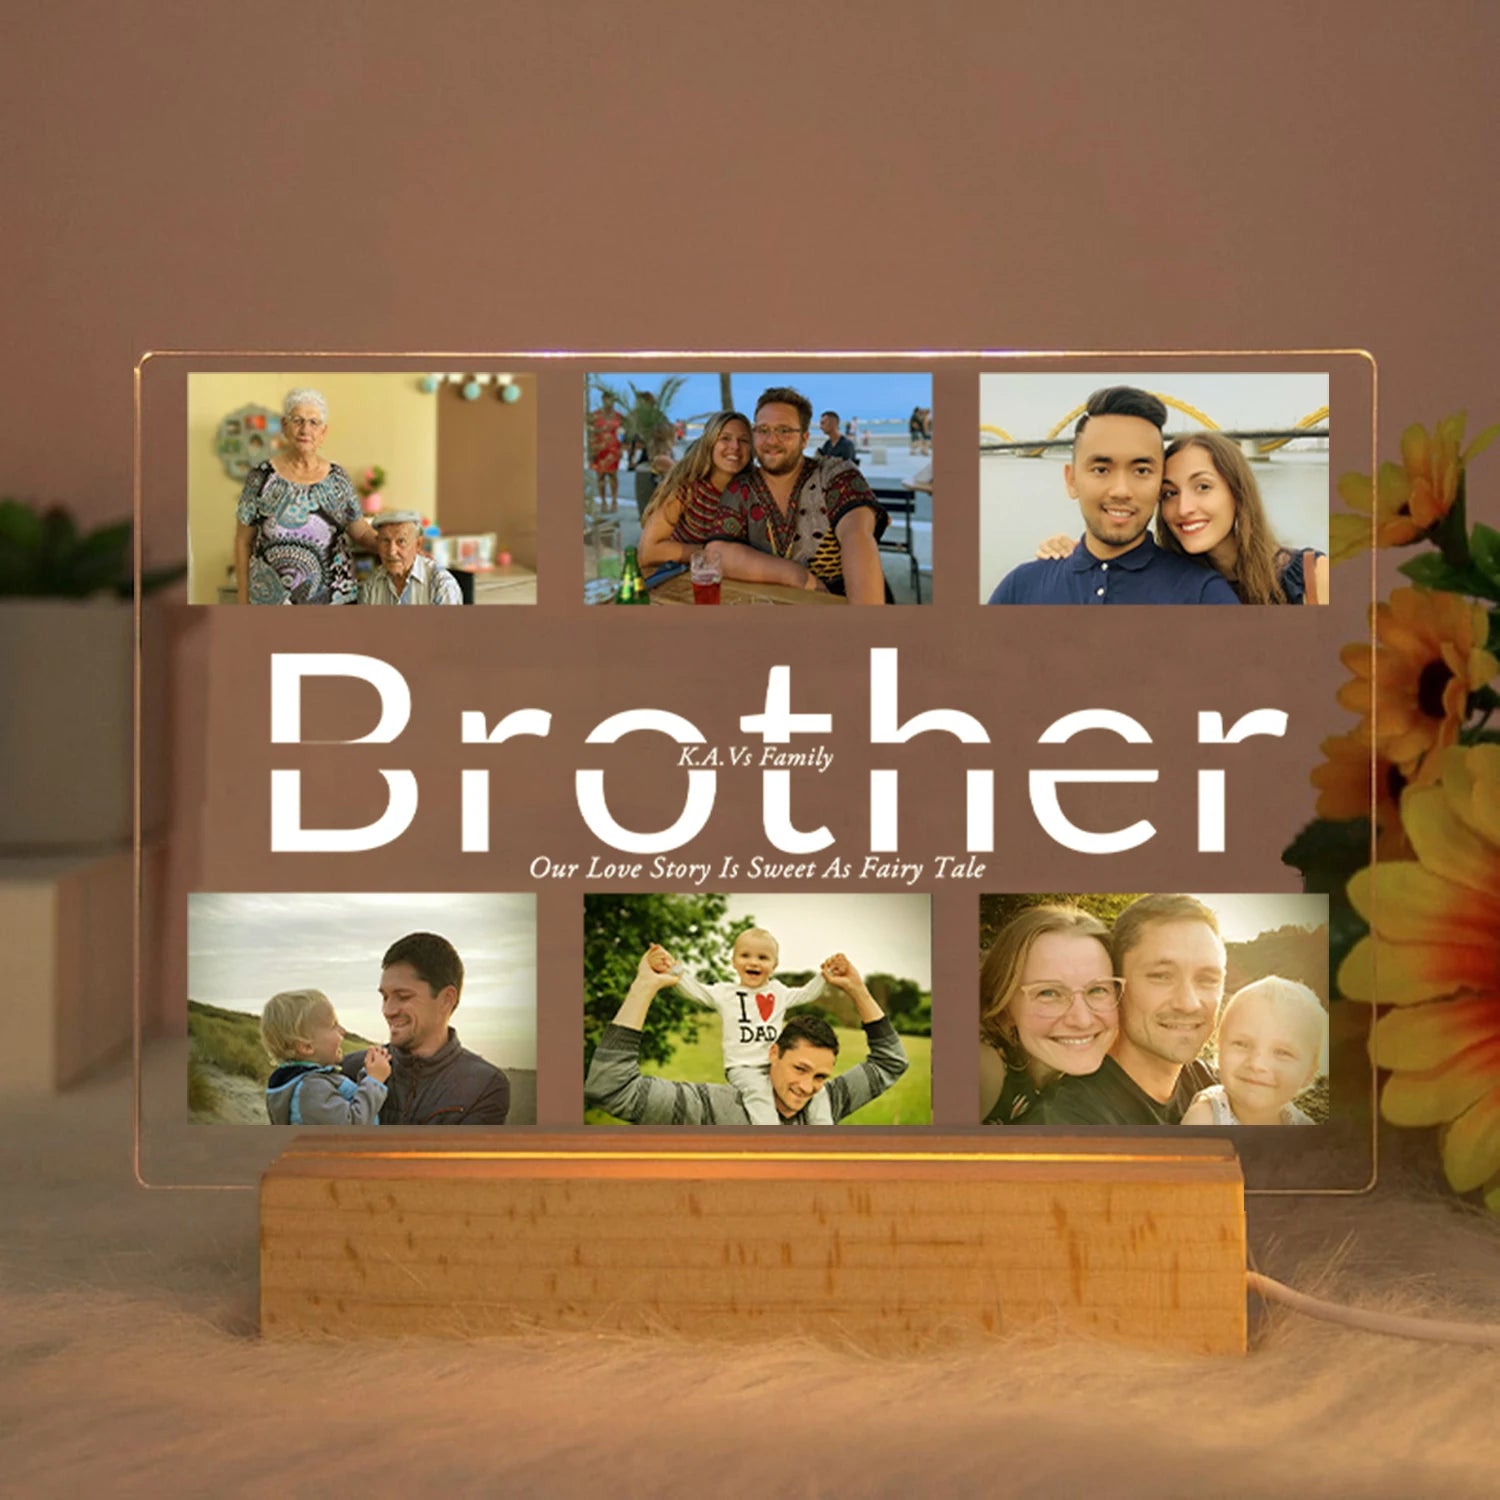 Personalized Acrylic Lamp with Custom Photo and Text - Ideal Bedroom Night Light for MOM DAD LOVE Friend Family Day Wedding Birthday Gift Present Brother / Warm Light